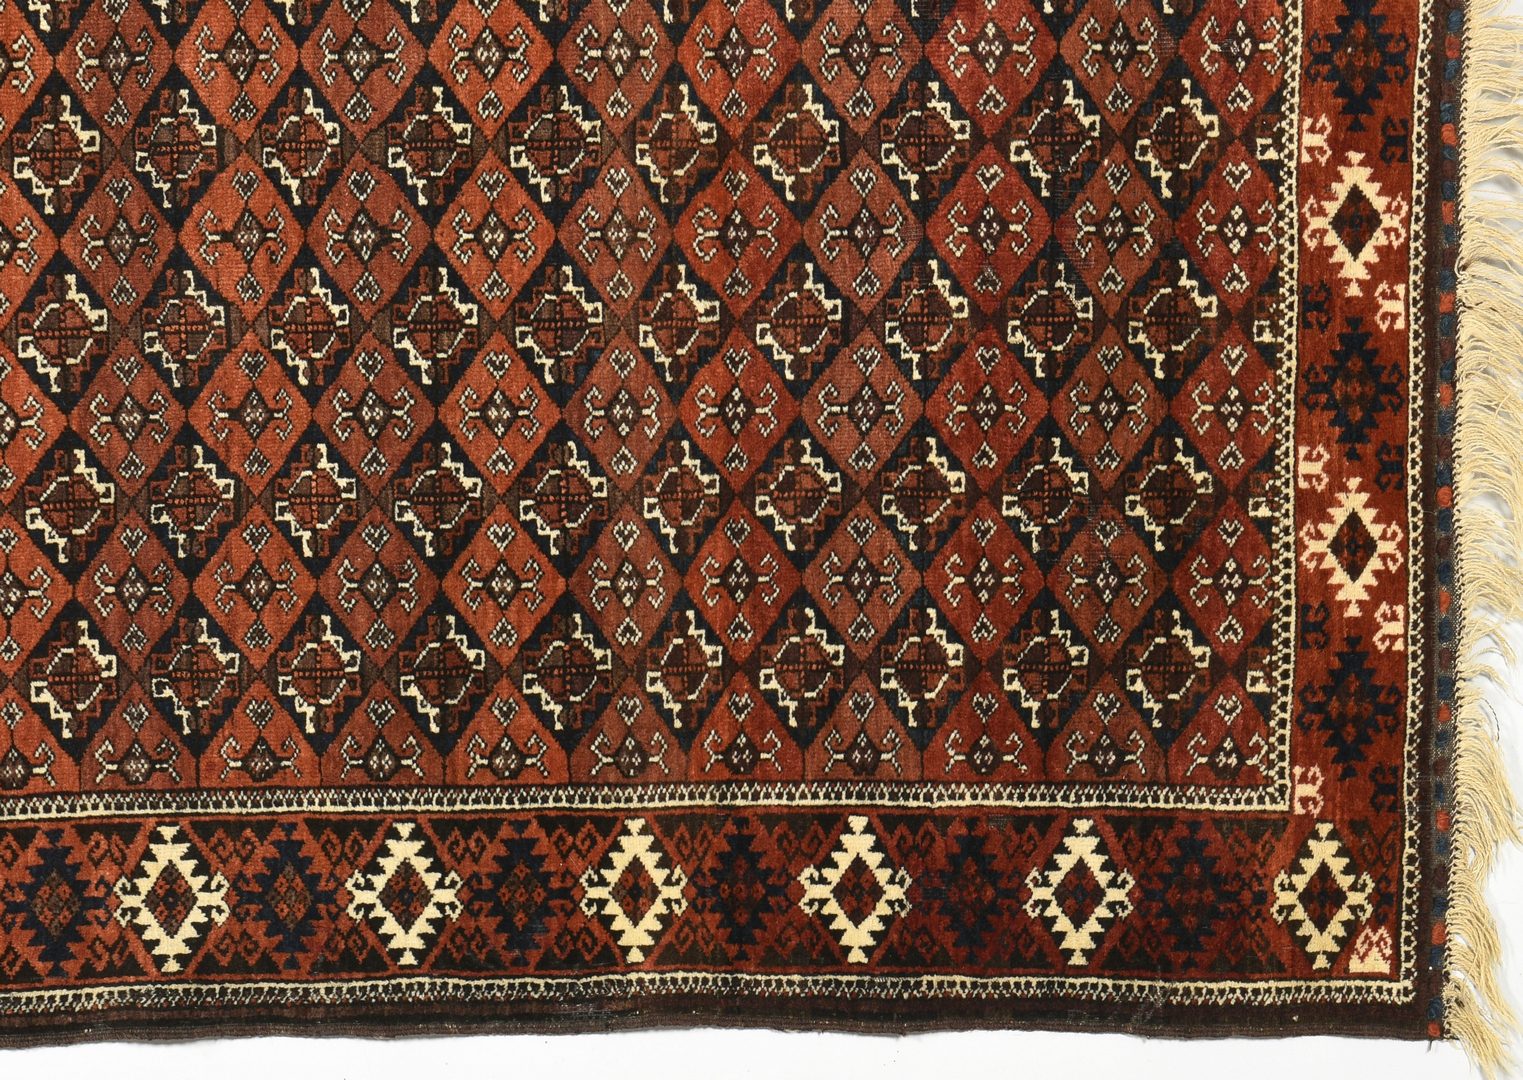 Lot 913: Antique Afghan Balouch Rug, 8'8" x 3'8"